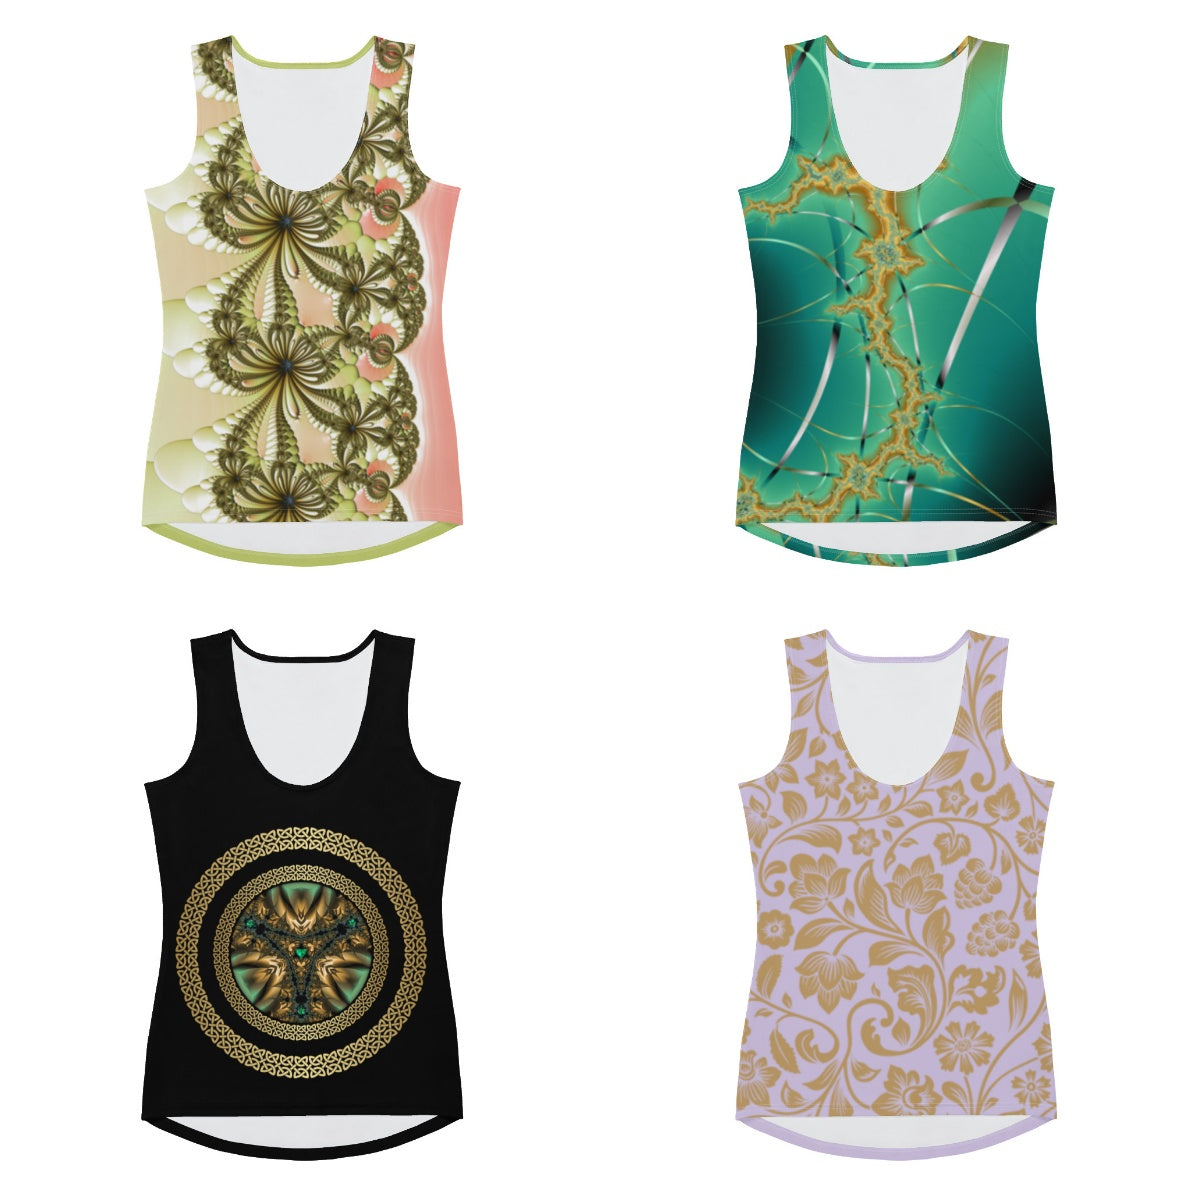 The Perfect Graphic Tank Tops for Women and Any Occasion.